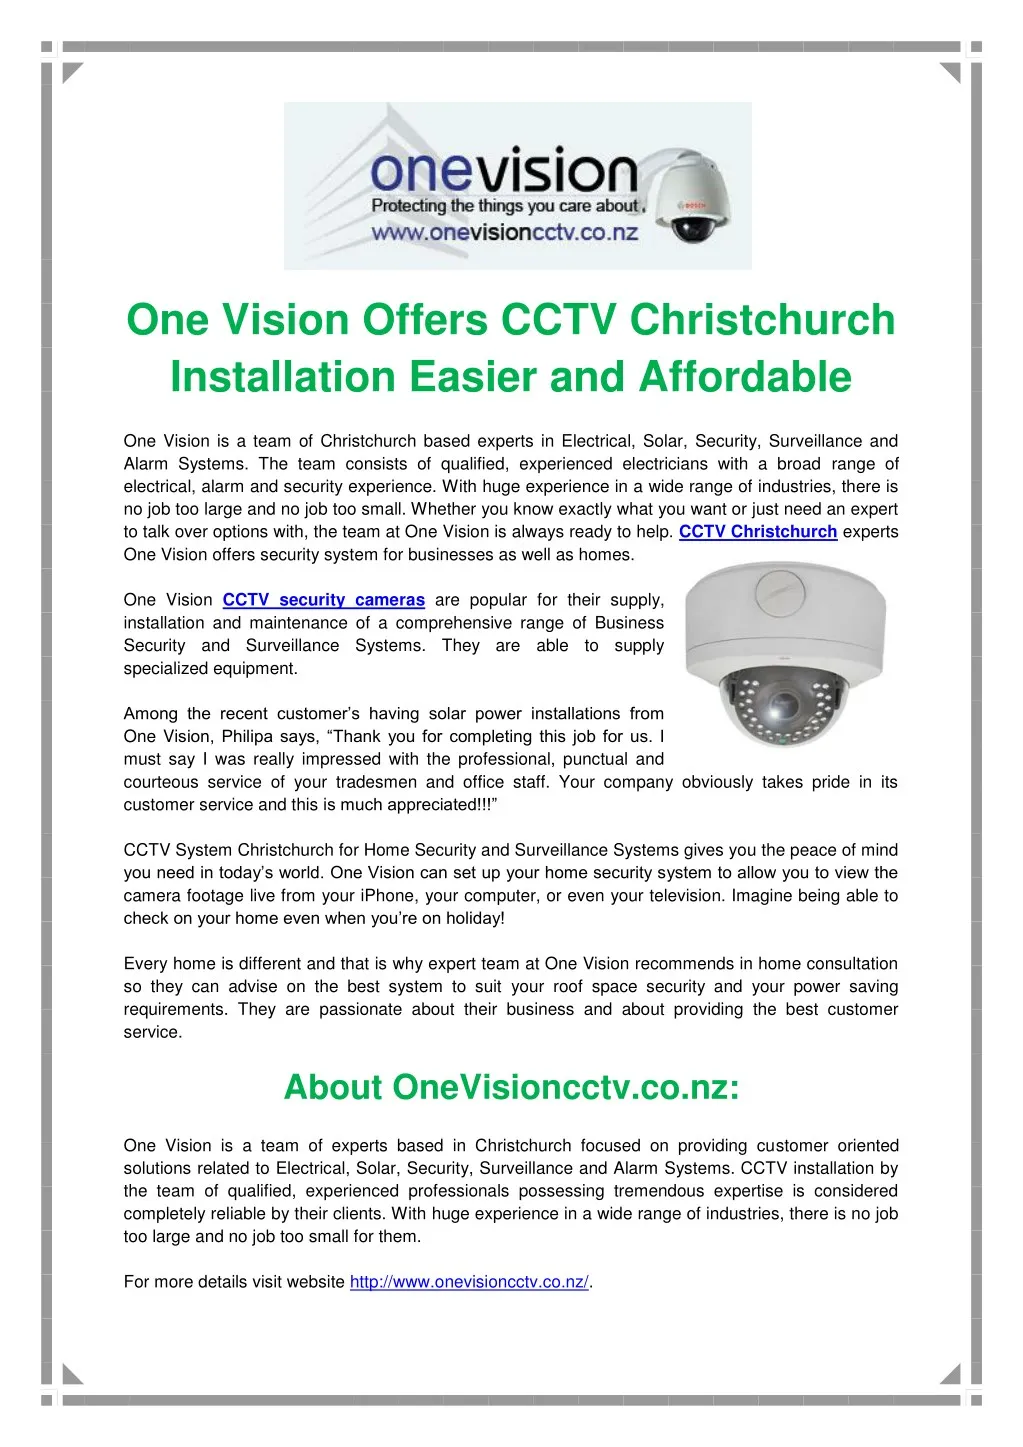 one vision offers cctv christchurch installation